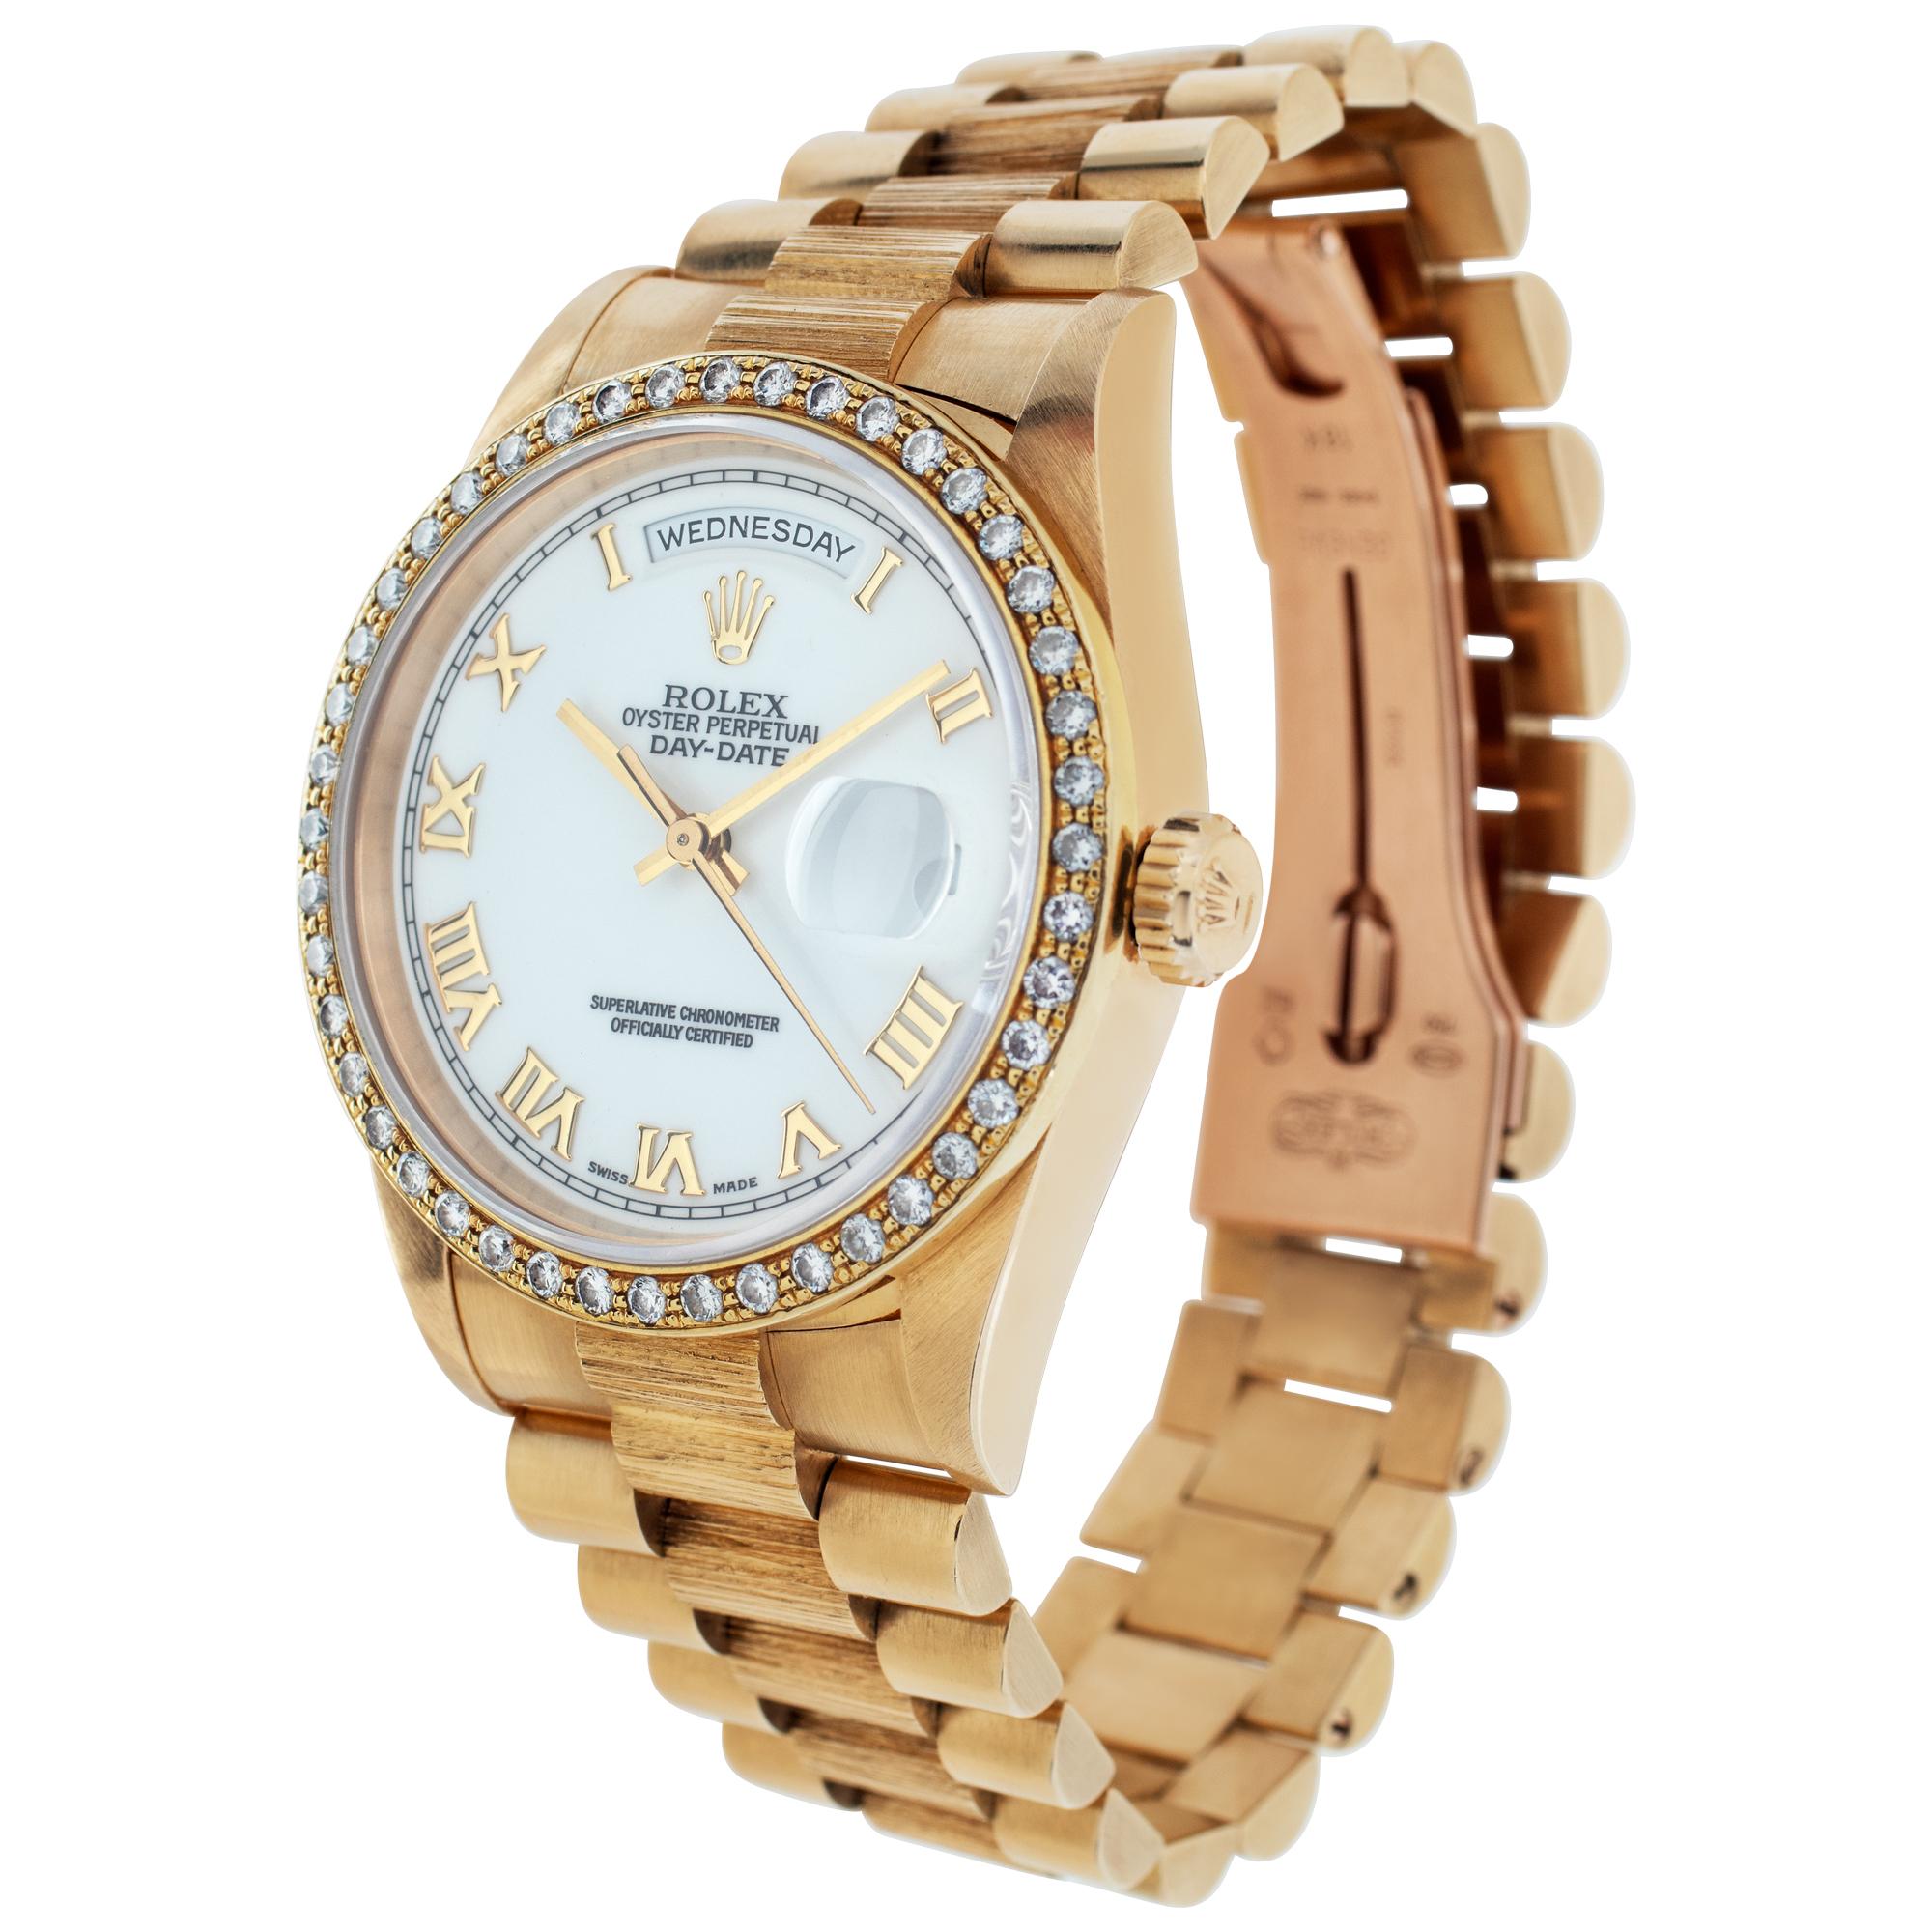 Rolex Day-Date with cutsom diamond bezel and white Roman mumeral dial on an original bark finish President bracelet. Auto w/ sweep seconds, date and day. 36 mm case size. Ref 18248. Circa 1995. **Bank wire only at this price** Fine Pre-owned Rolex